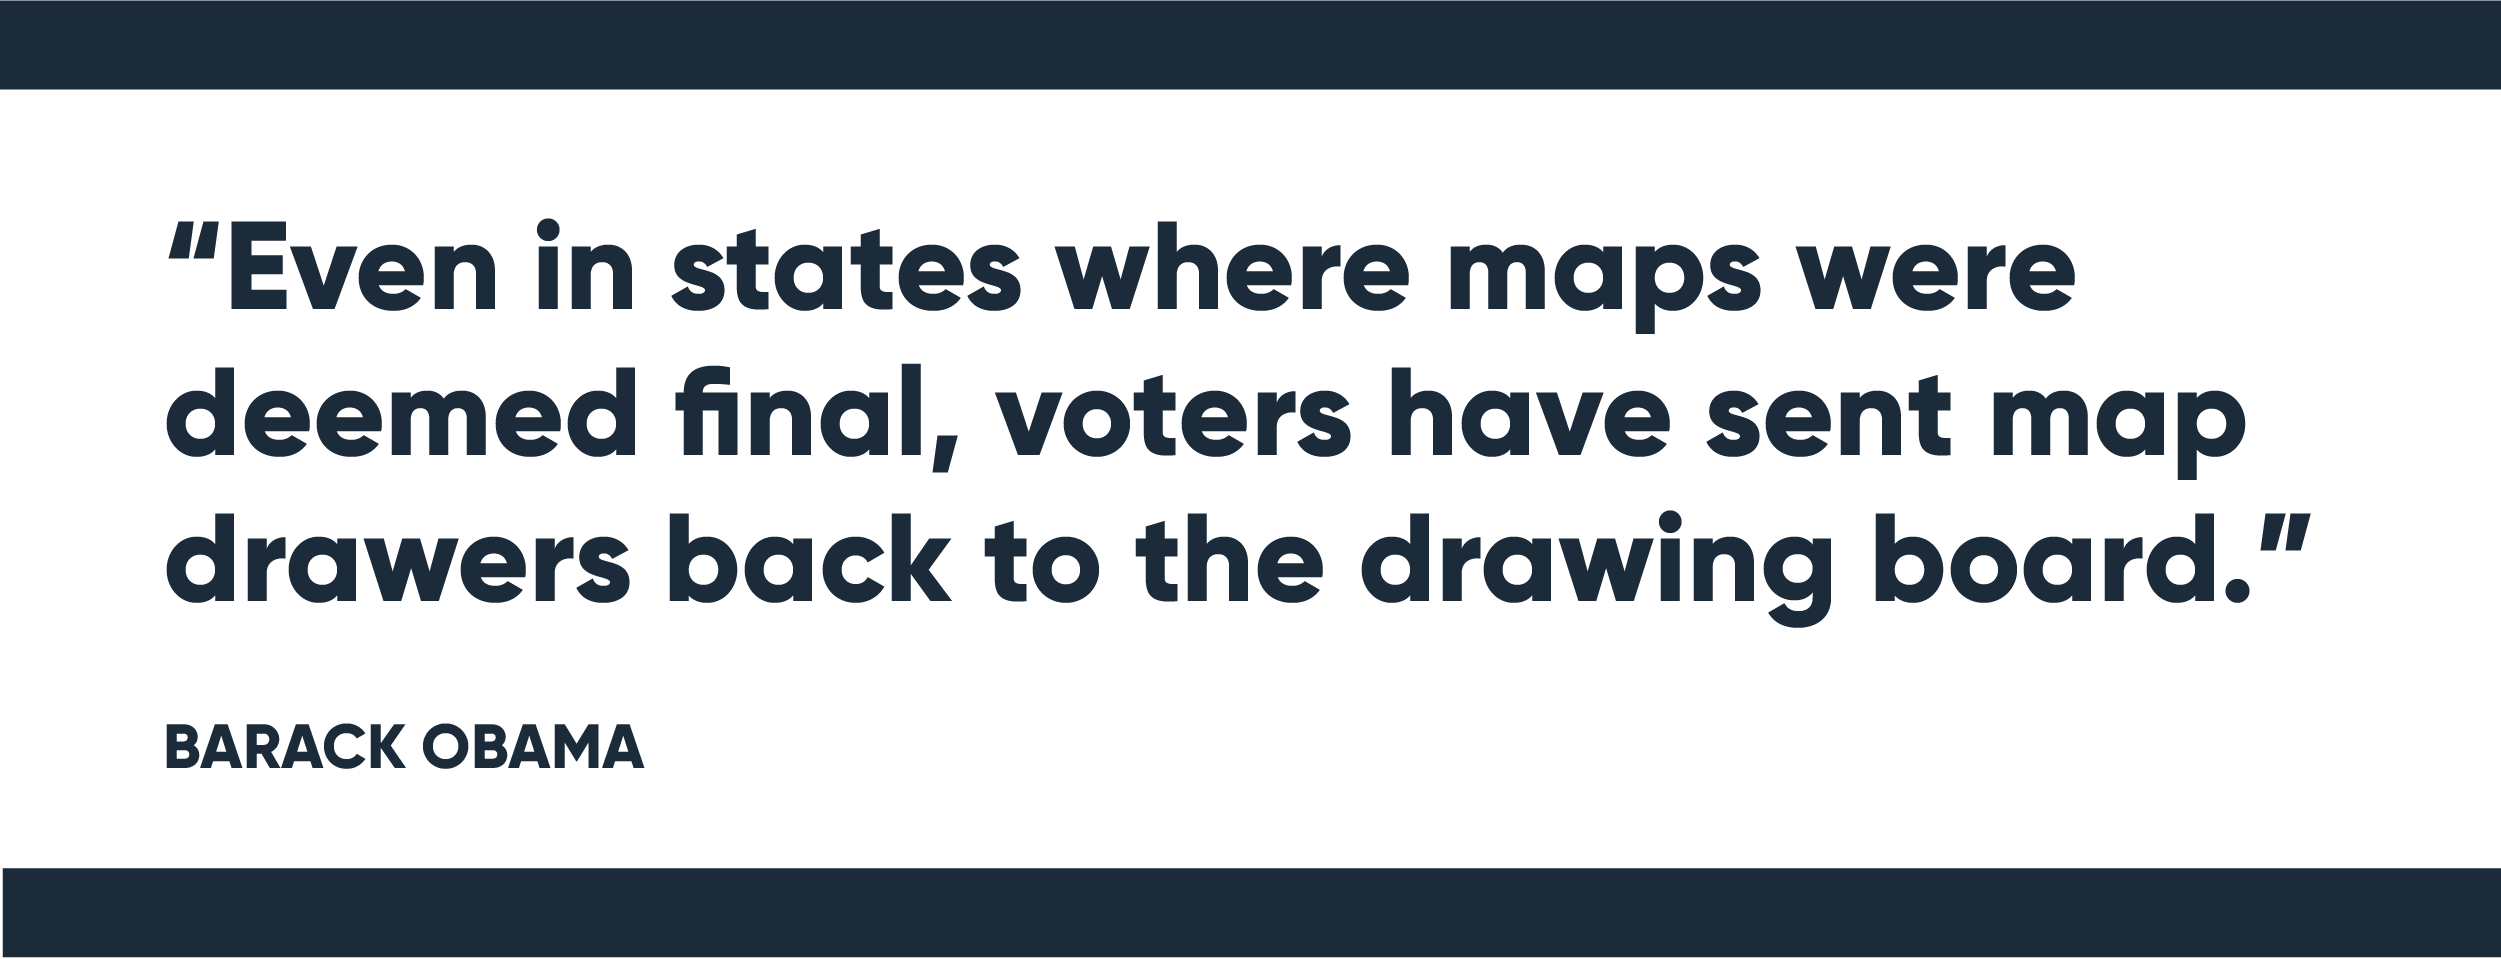 "Even in states where maps were deemed final, voters have sent map drawers back to the drawing board." -- President Obama